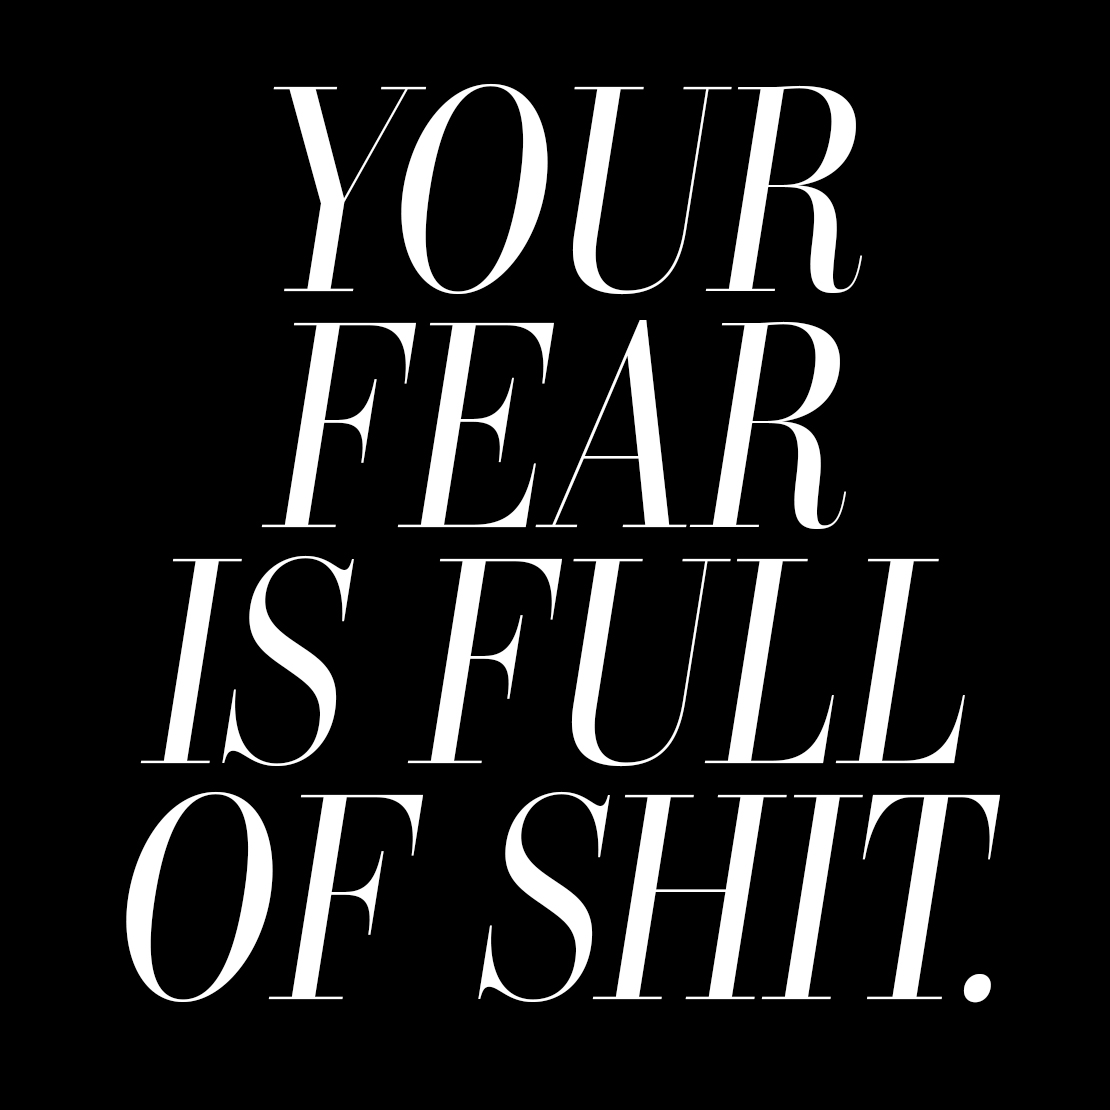 Your fear is full of shit